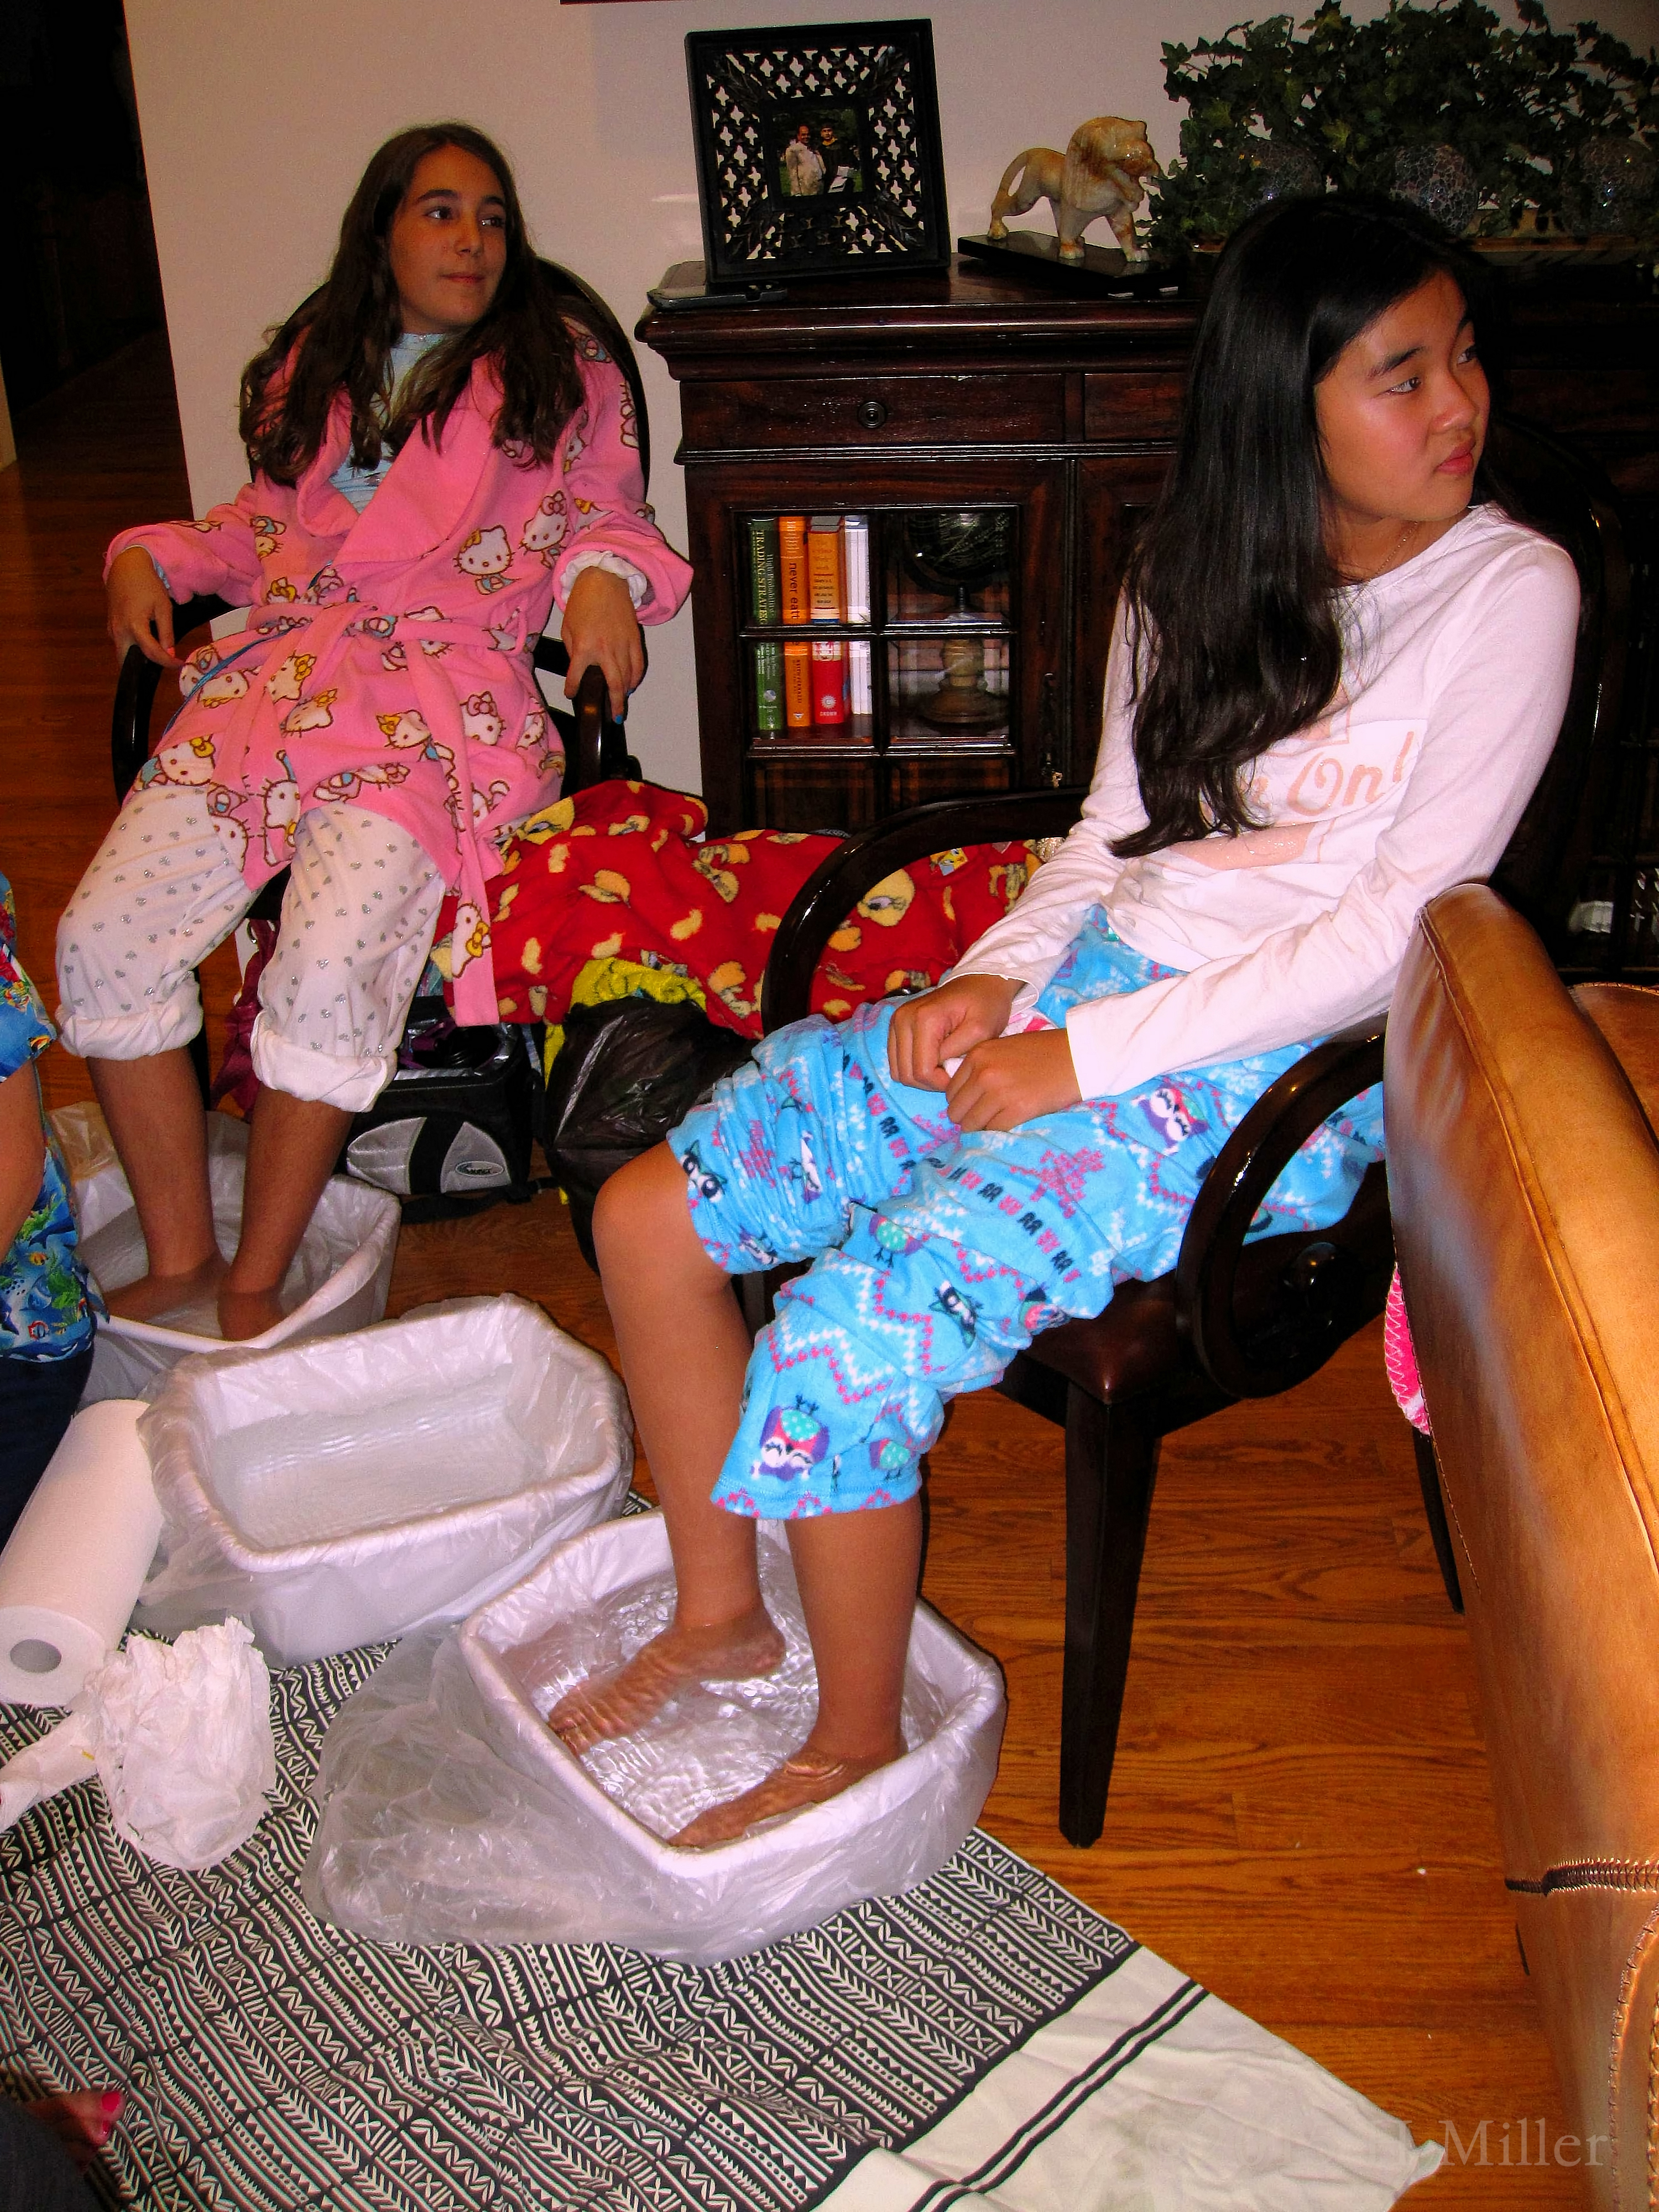 More Girls Preparing For Their Pedicure 